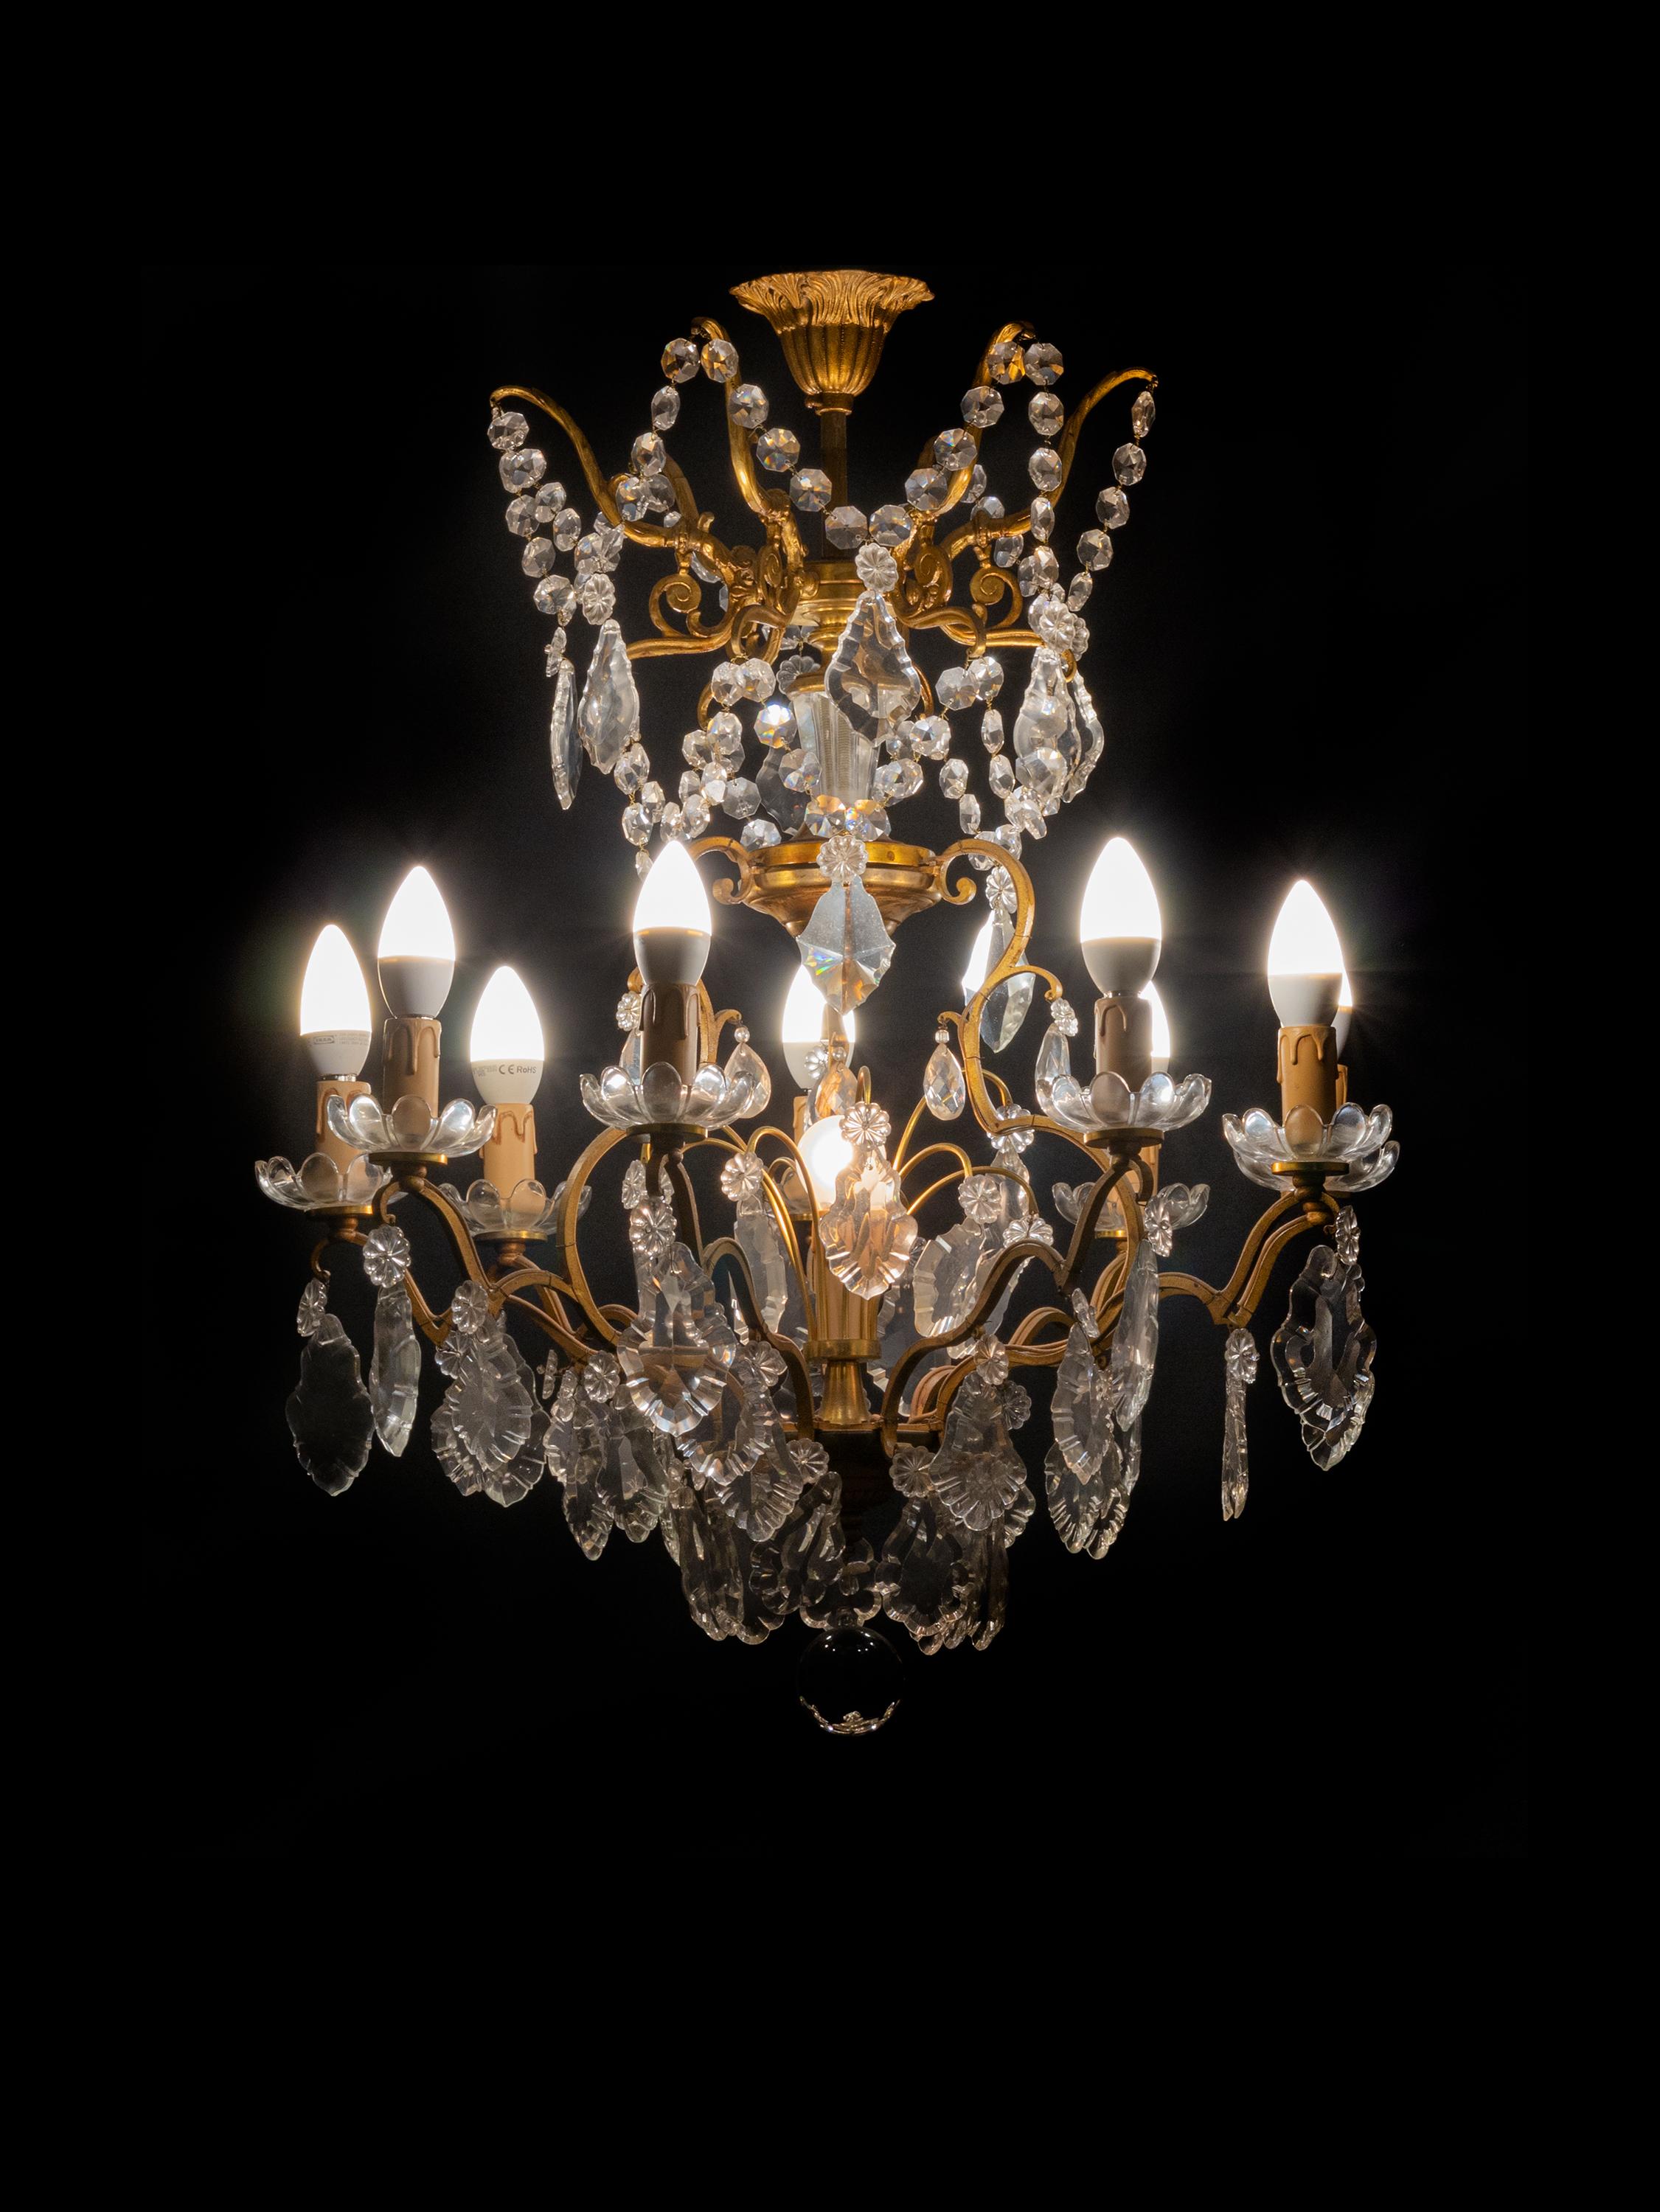 A Classic Louis XV style chandelier having 9 arms and 10 lamps (9 lamps and 1 central lamp).
The gilt metal frame heavily laden with various sized crystal plaquettes.
Originally candle lit but now completely electrified. 
Electric Installation